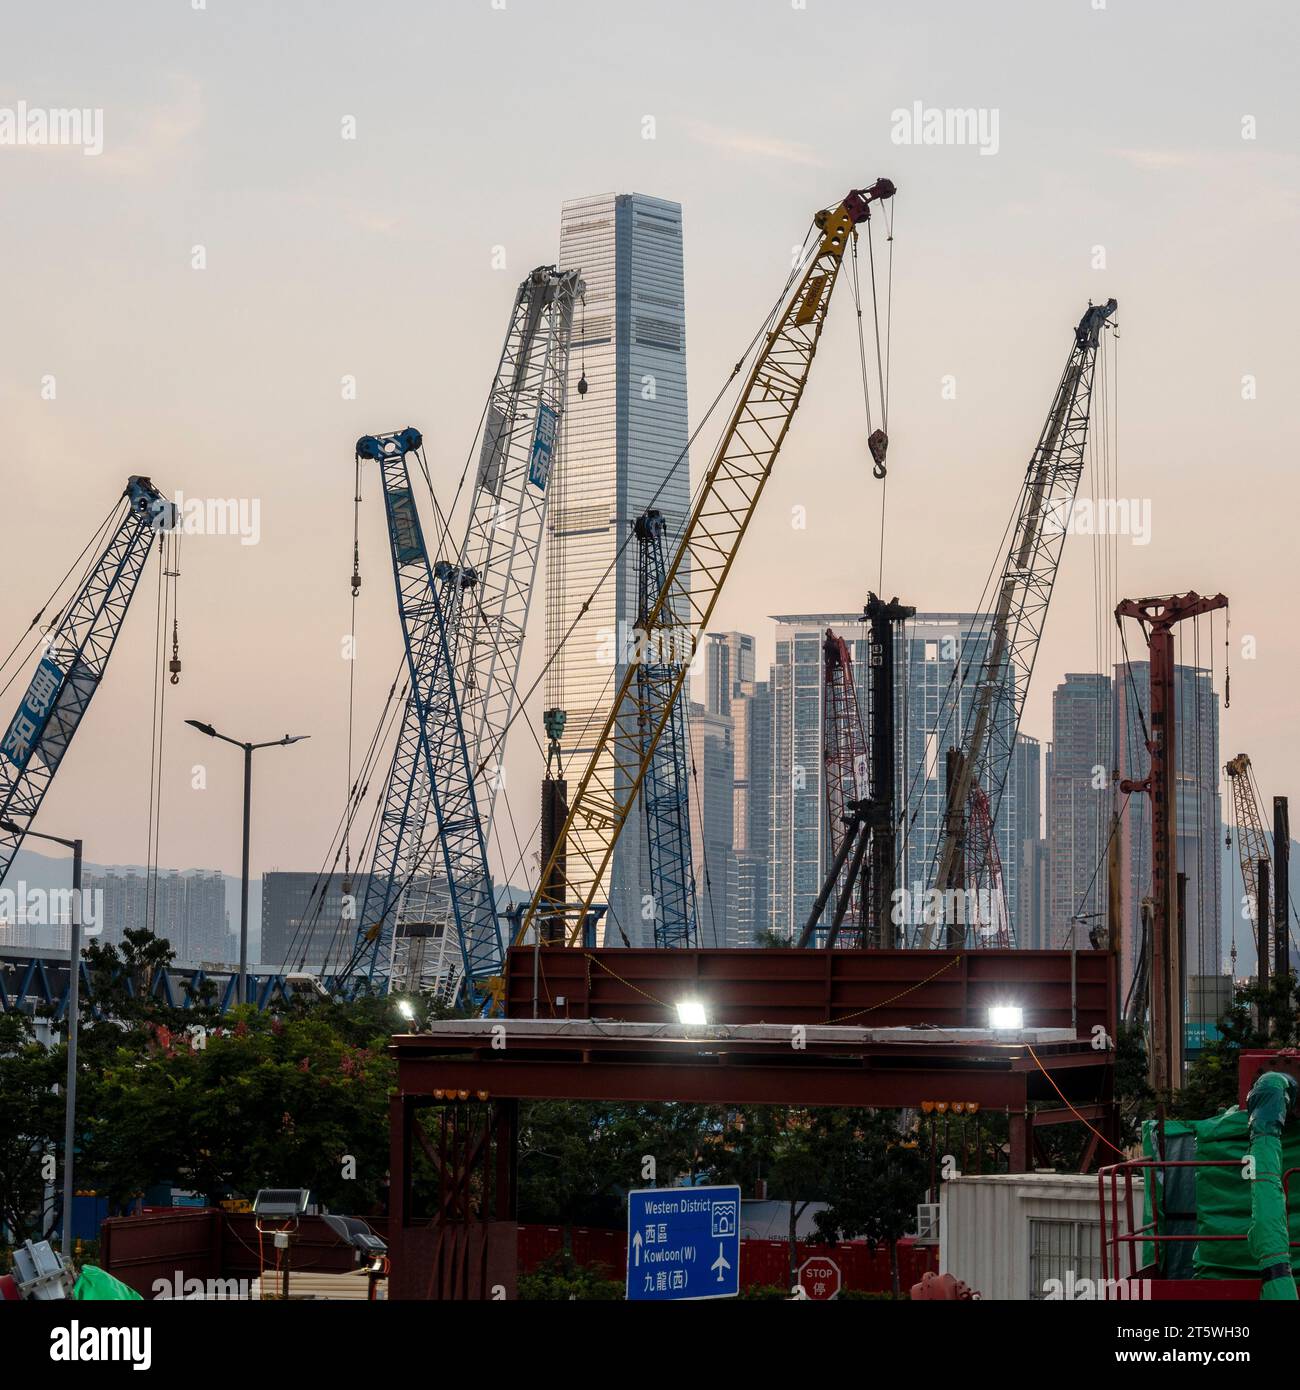 New construction and developments in central financial district, Hong Kong, China. Stock Photo